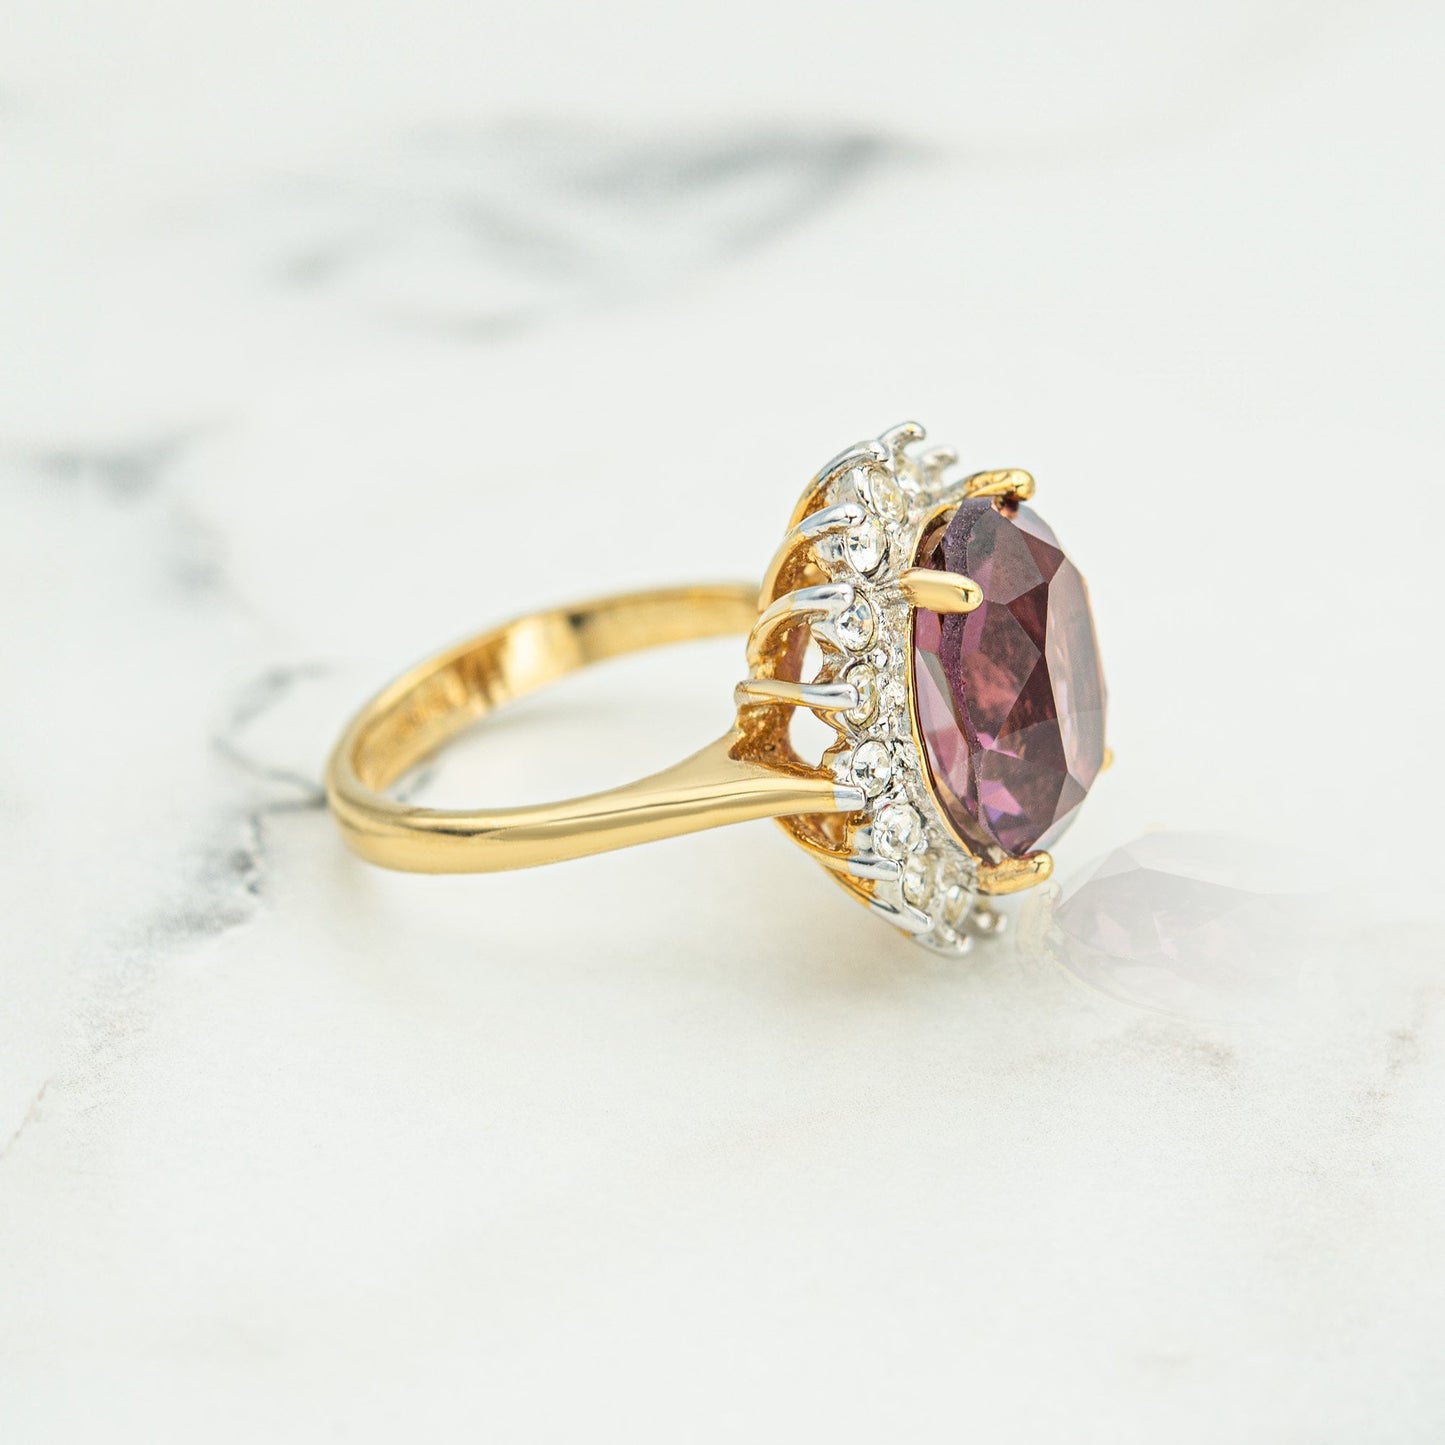 Vintage Ring Amethyst and Clear Austrian Crystal Cocktail Ring 18k Gold #R1222-AY - Never Worn Statement Cocktail Womans Antique Rings